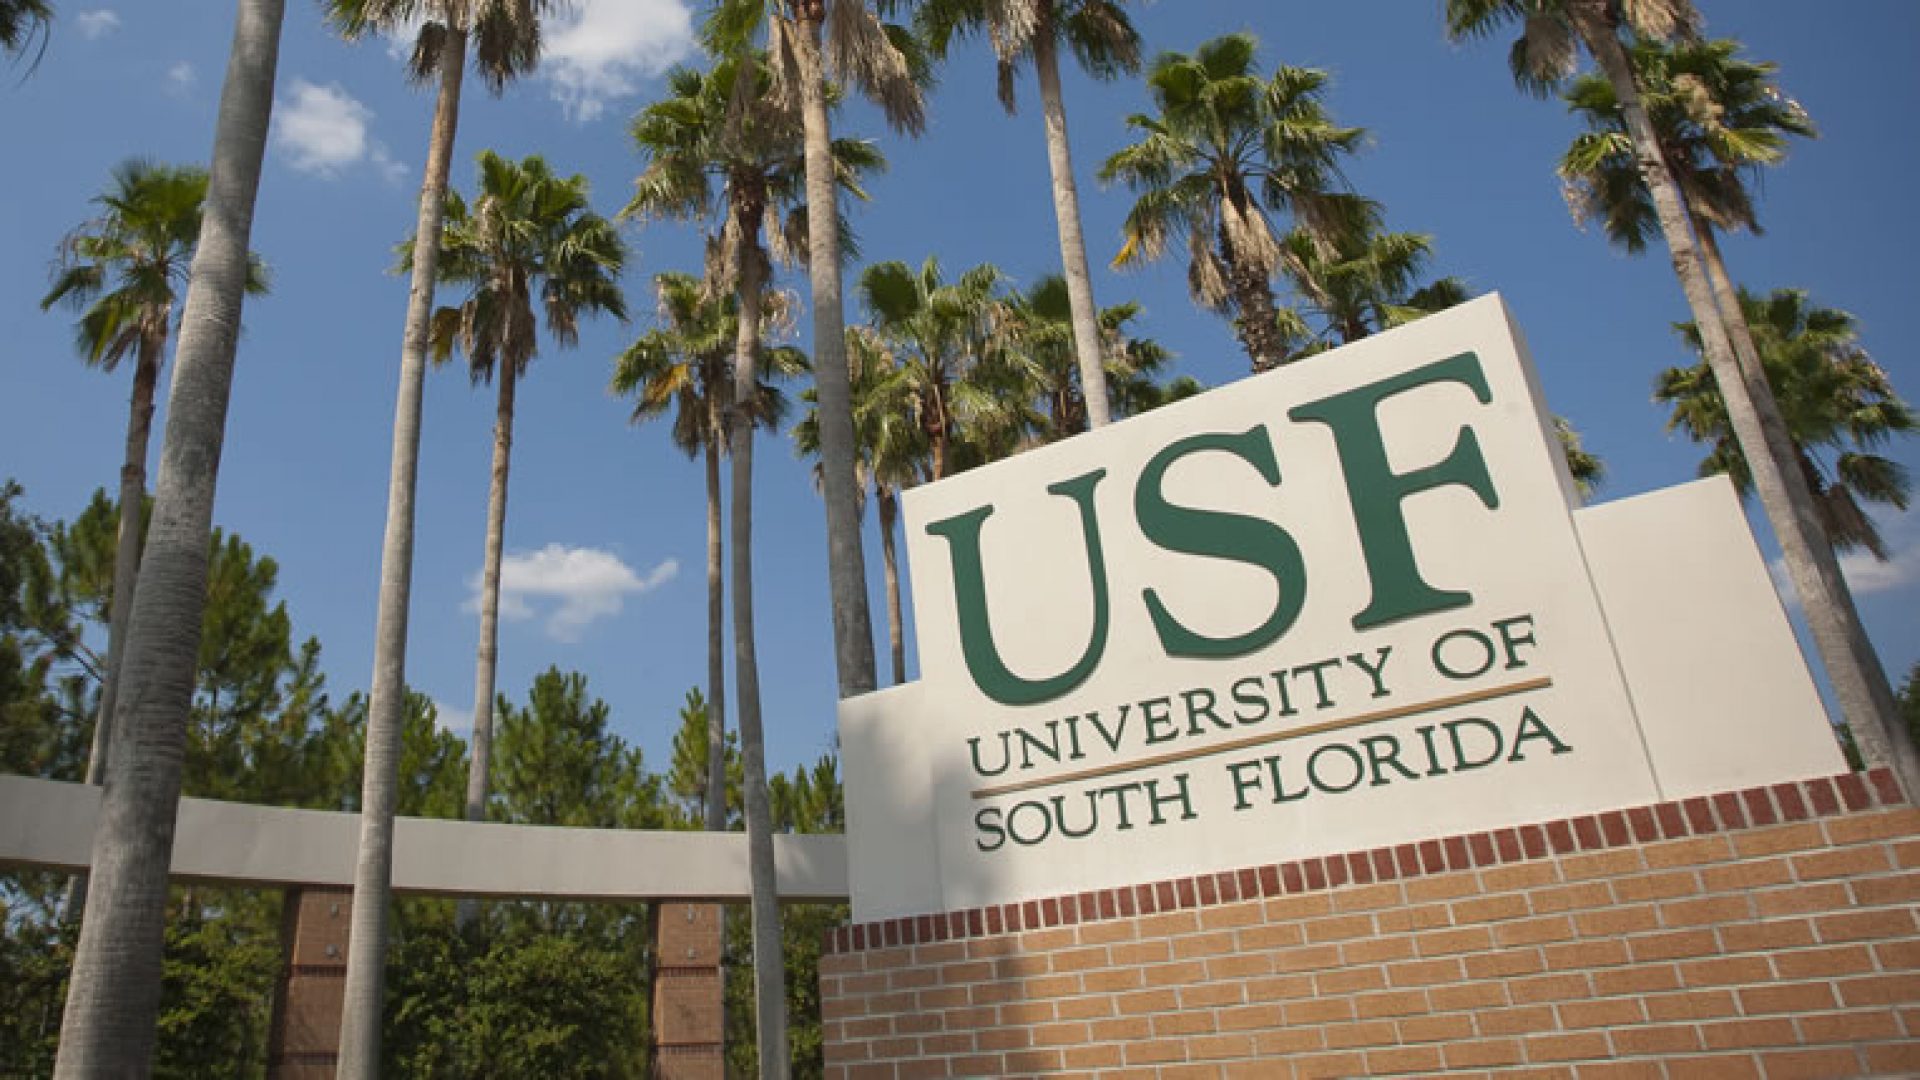 Florida’s public university campuses set to reopen in the fall